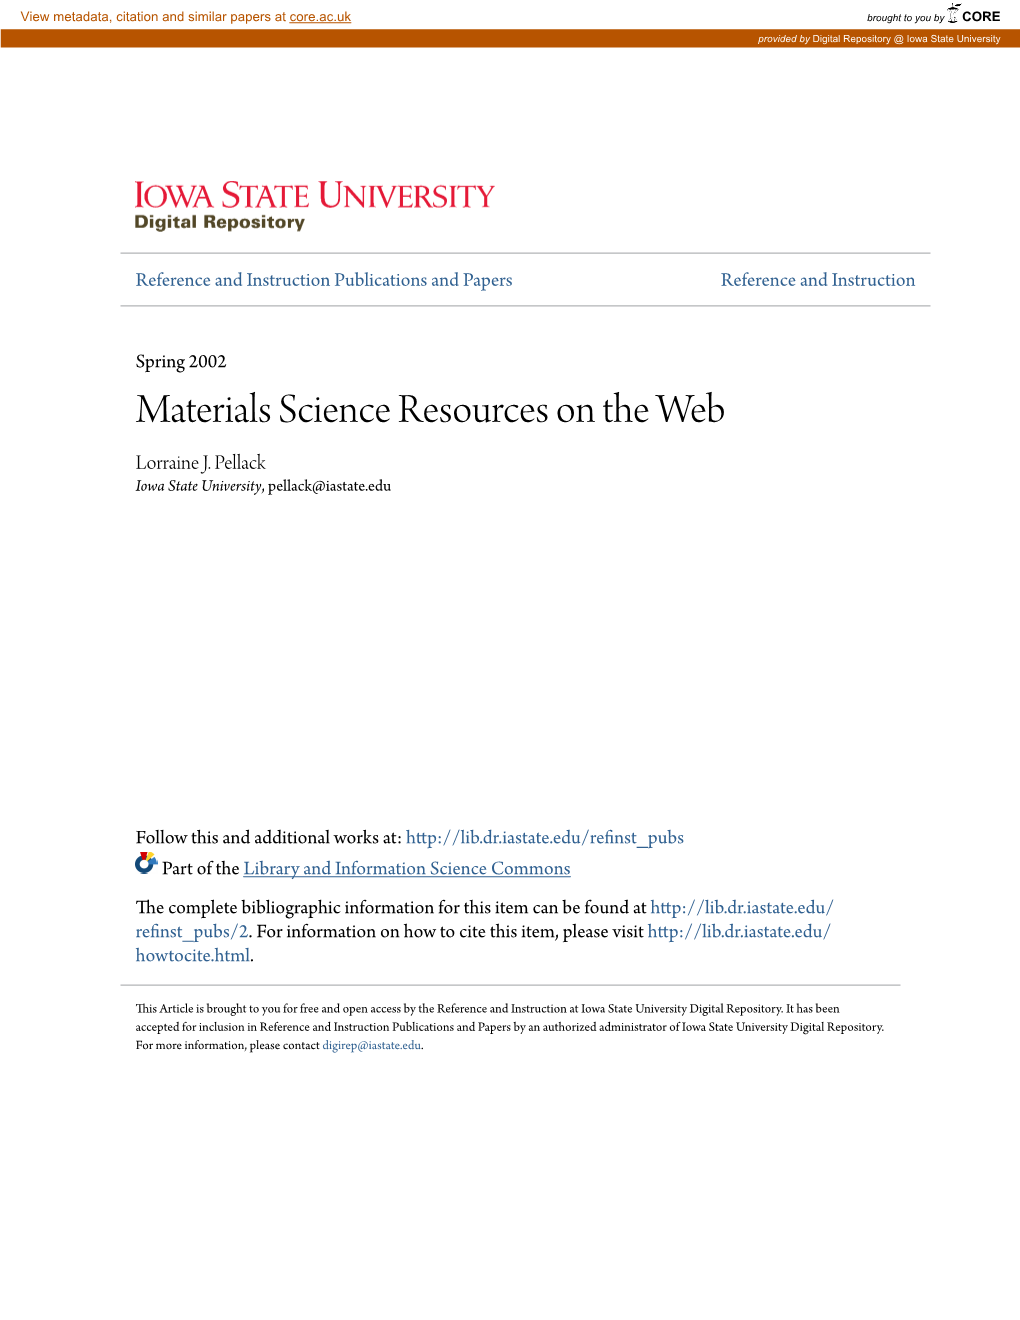 Materials Science Resources on the Web Lorraine J